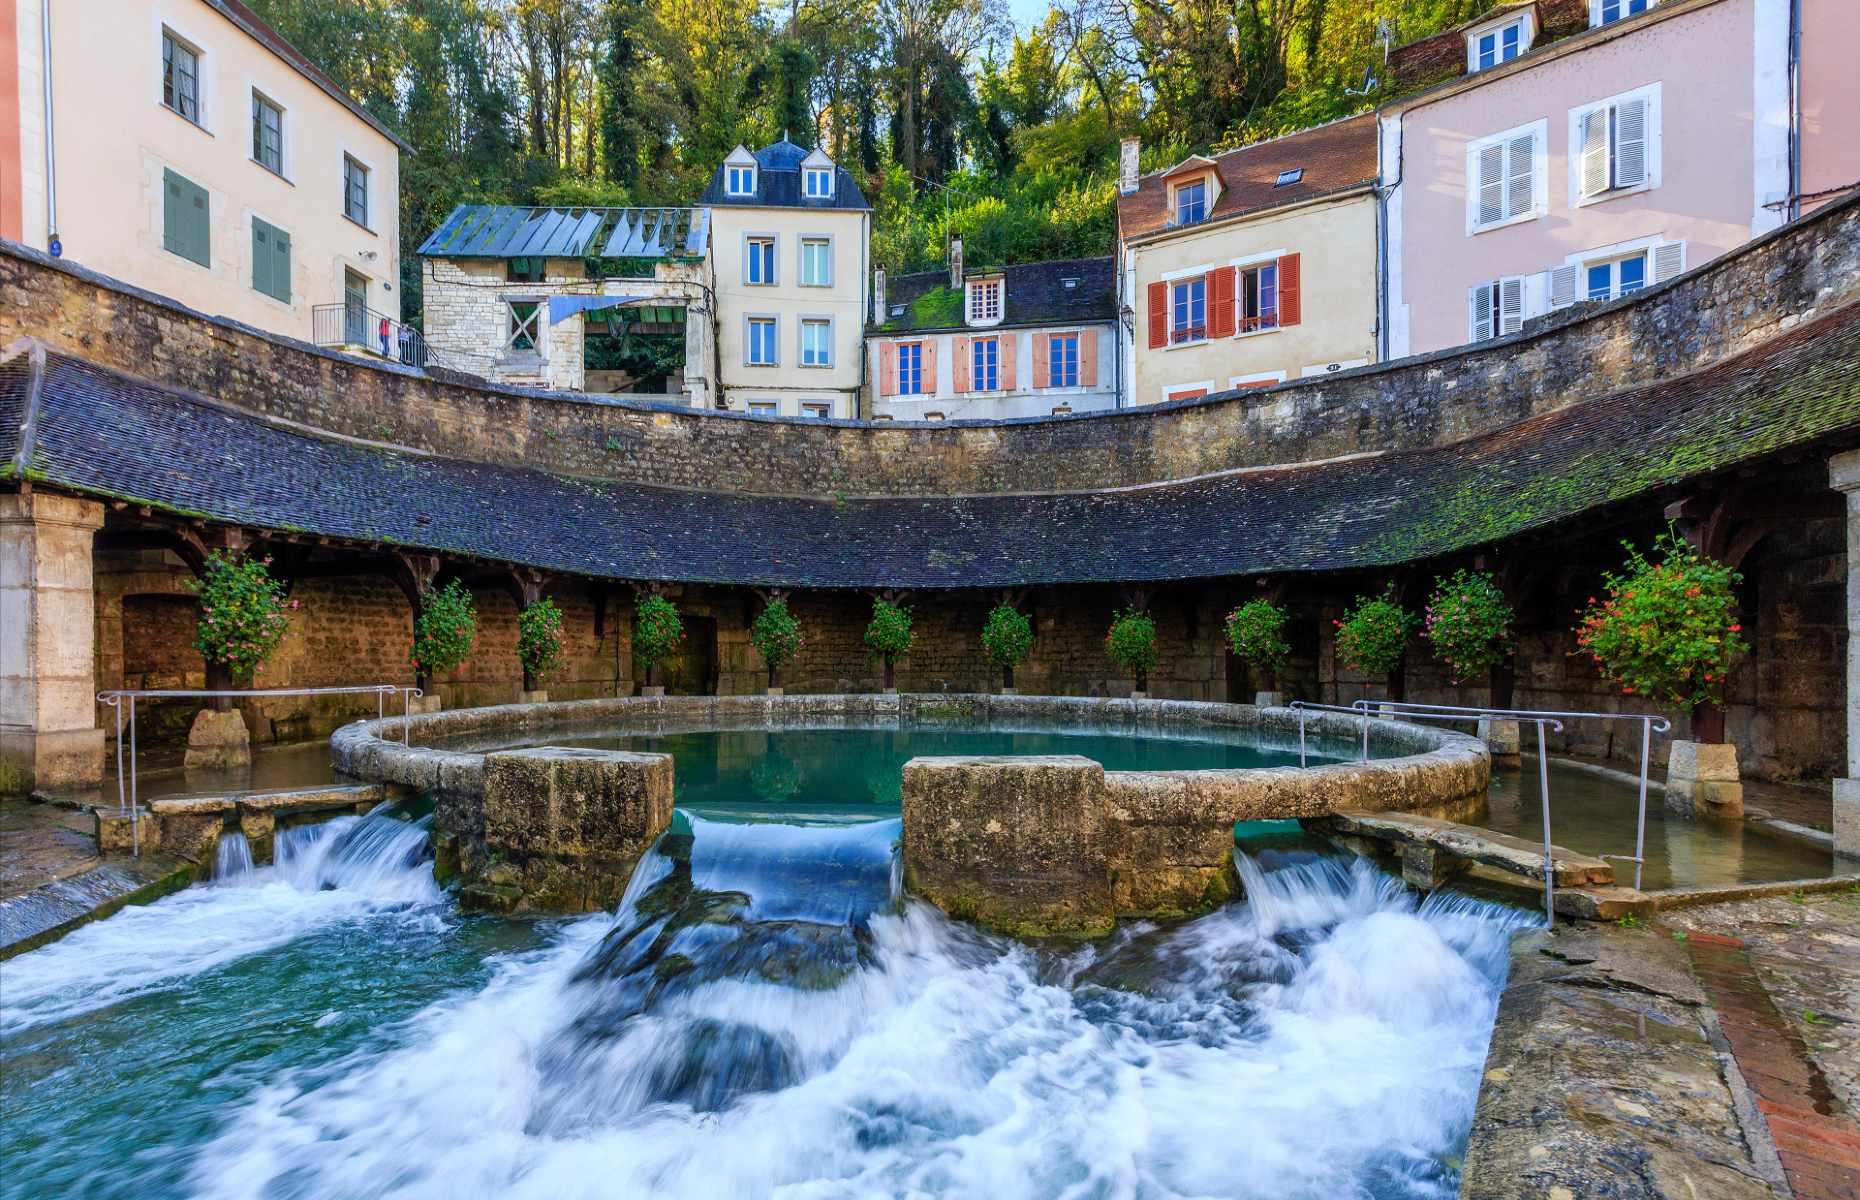 <p>Residents in the village of Tonnerre, in the heart of France’s Burgundy region, have been mystified by this bright blue spring for hundreds of years. The seemingly bottomless well gushes out around 311 liters (68 gallons) of water per second, yet its source has never been discovered. Cue plenty of local legends. One says its depths are patrolled by a huge, deadly serpent, while another suggests it’s a portal to other worlds.</p>